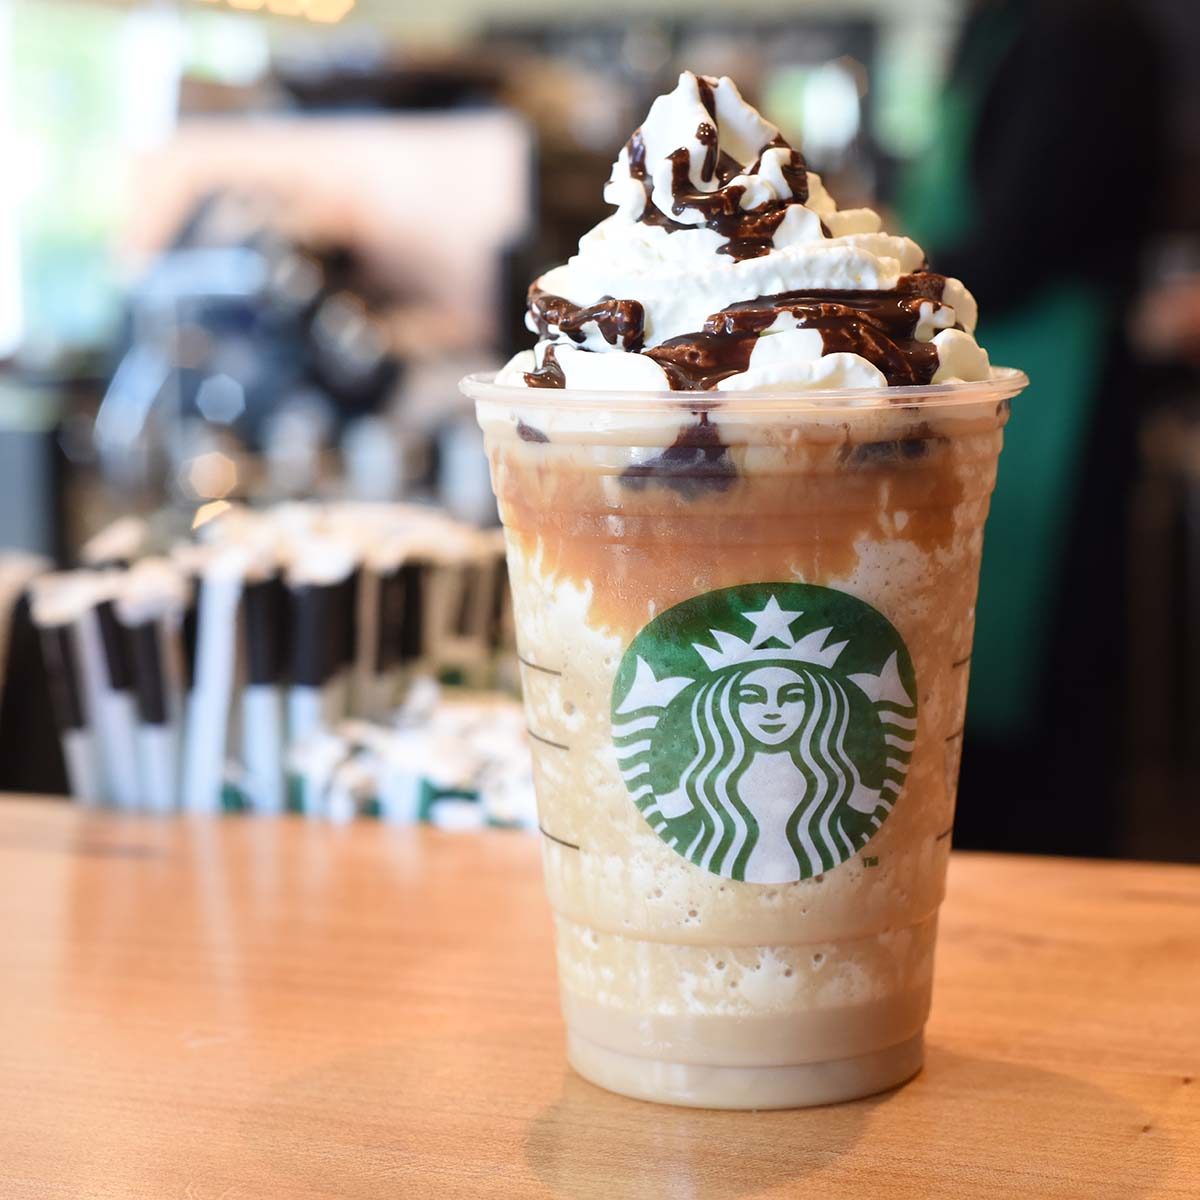 9 Things You Didn't Know About Starbucks  Starbucks, Starbucks coffee,  Coffee to go